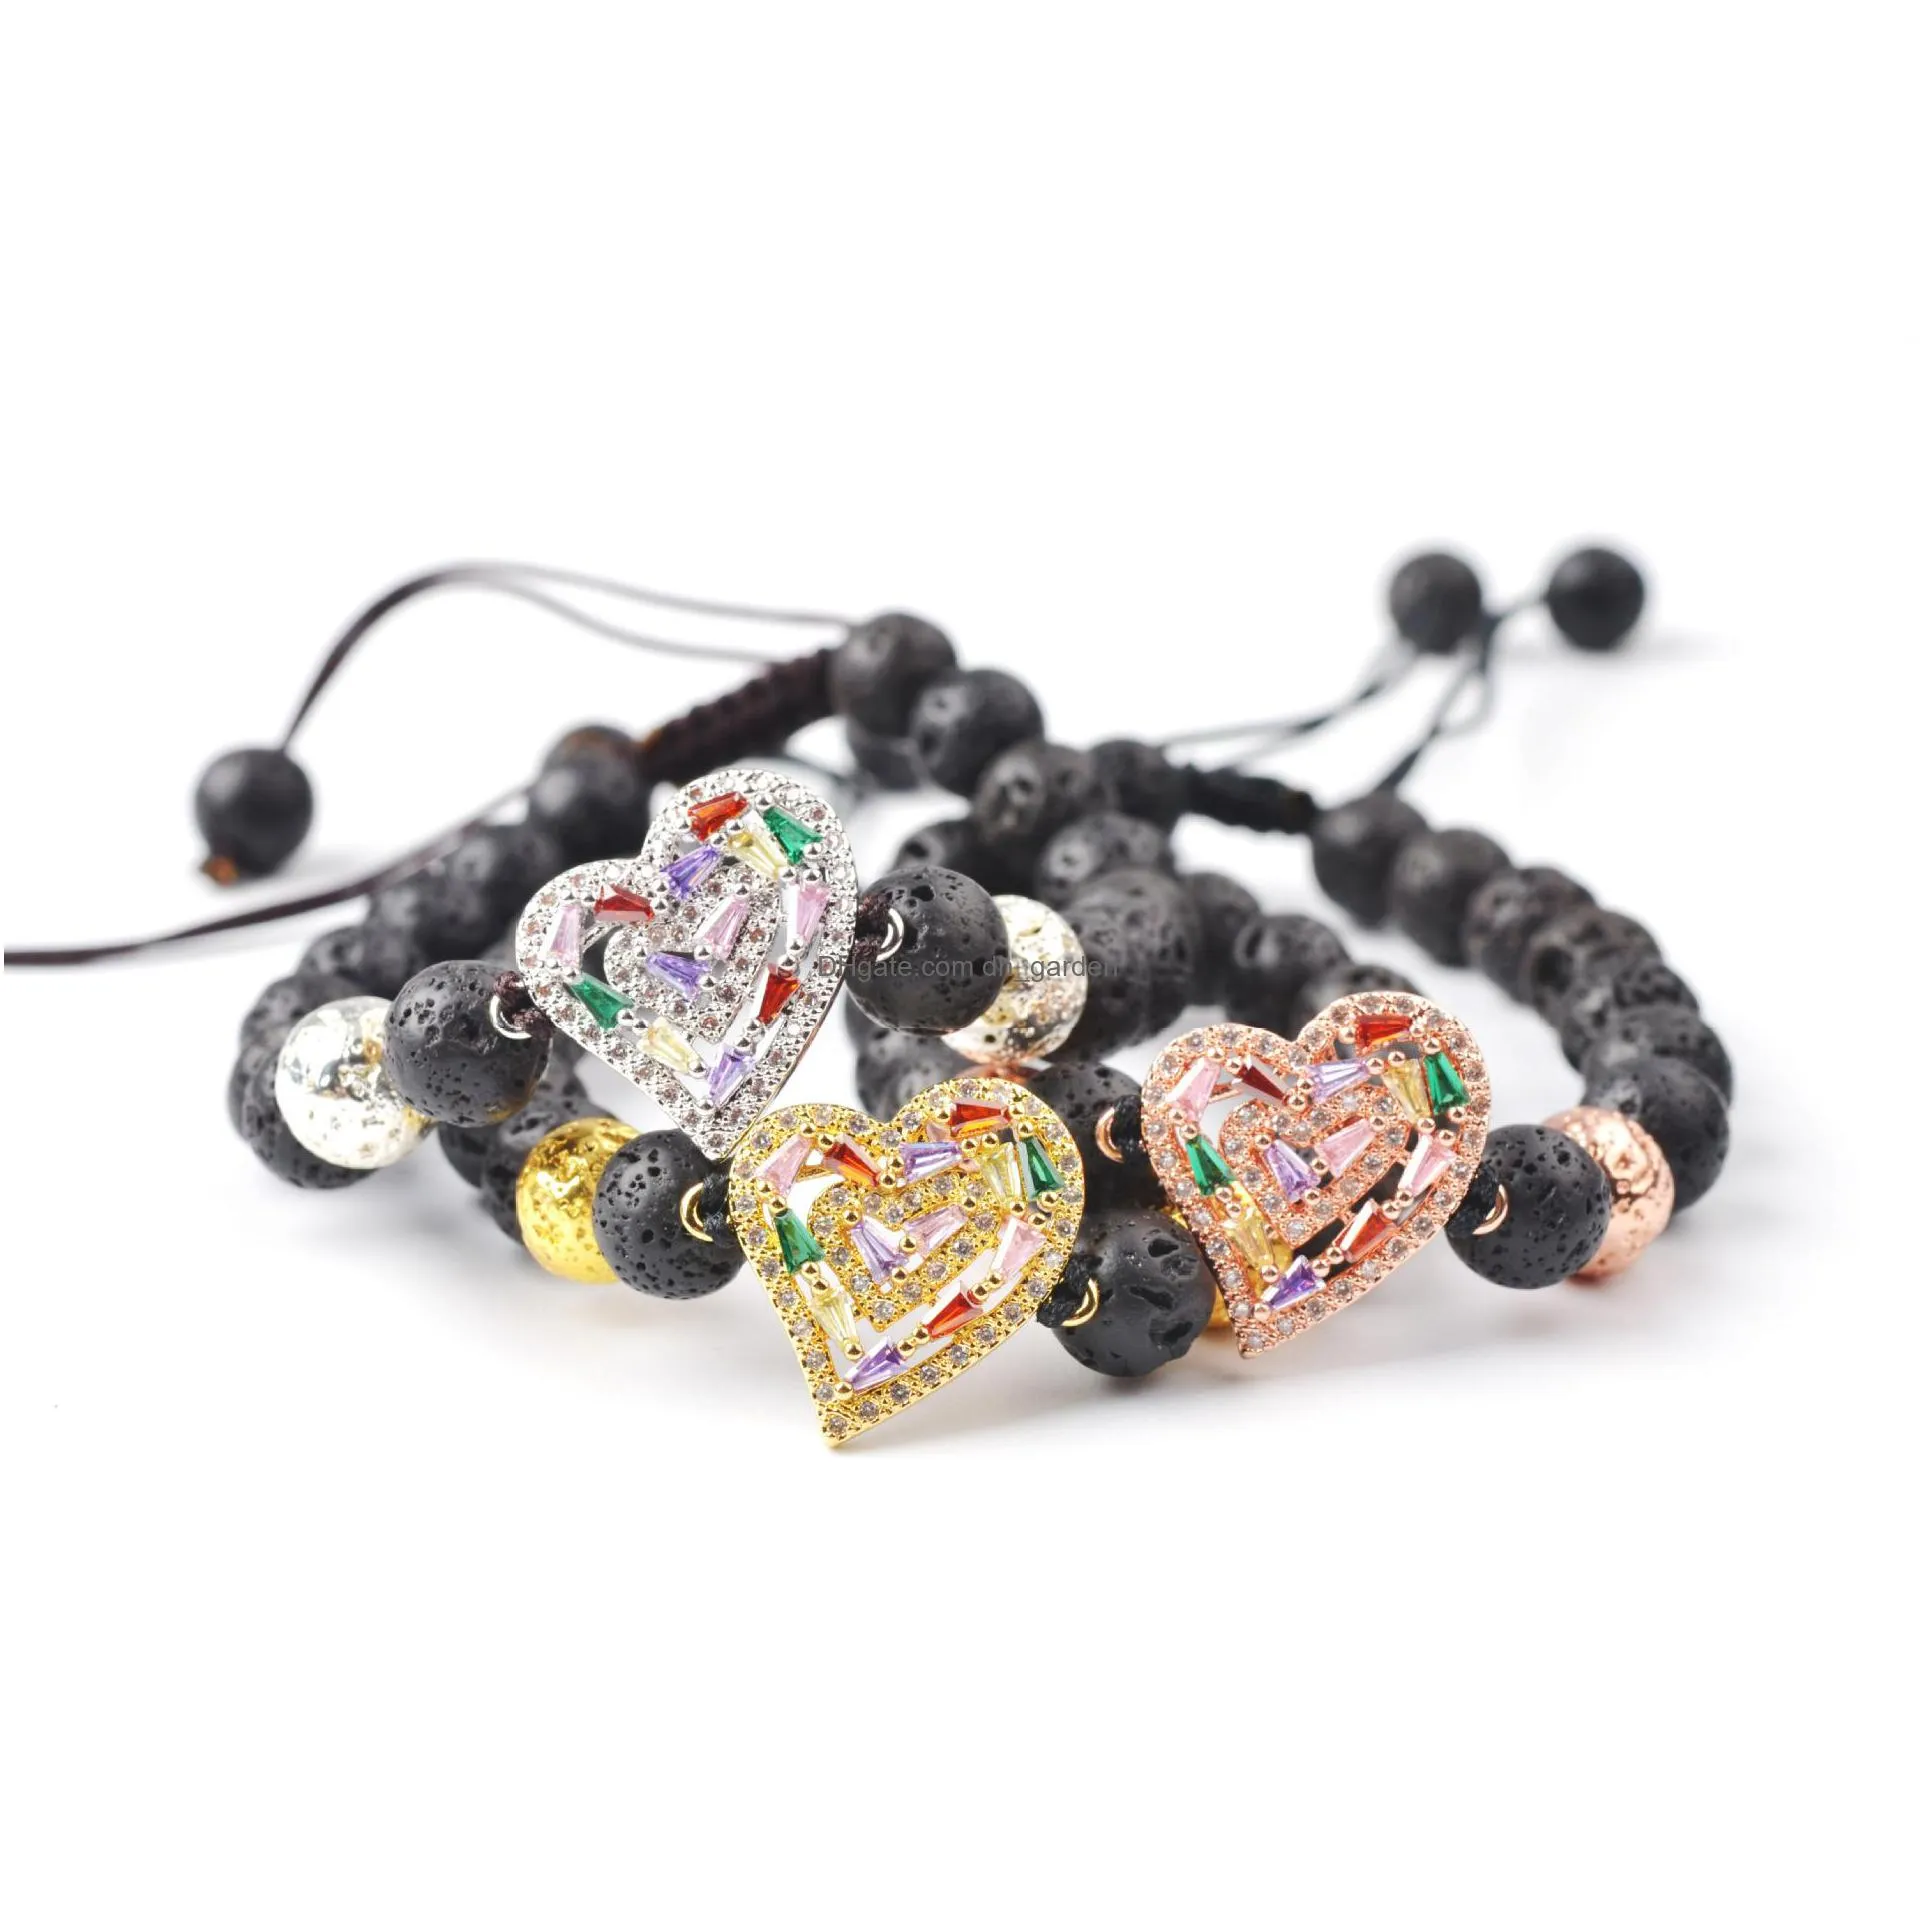 new style natural volcanic stone micro inlaid with haoshi love life tree energy bracelet hand woven string adjustable lava bracelet